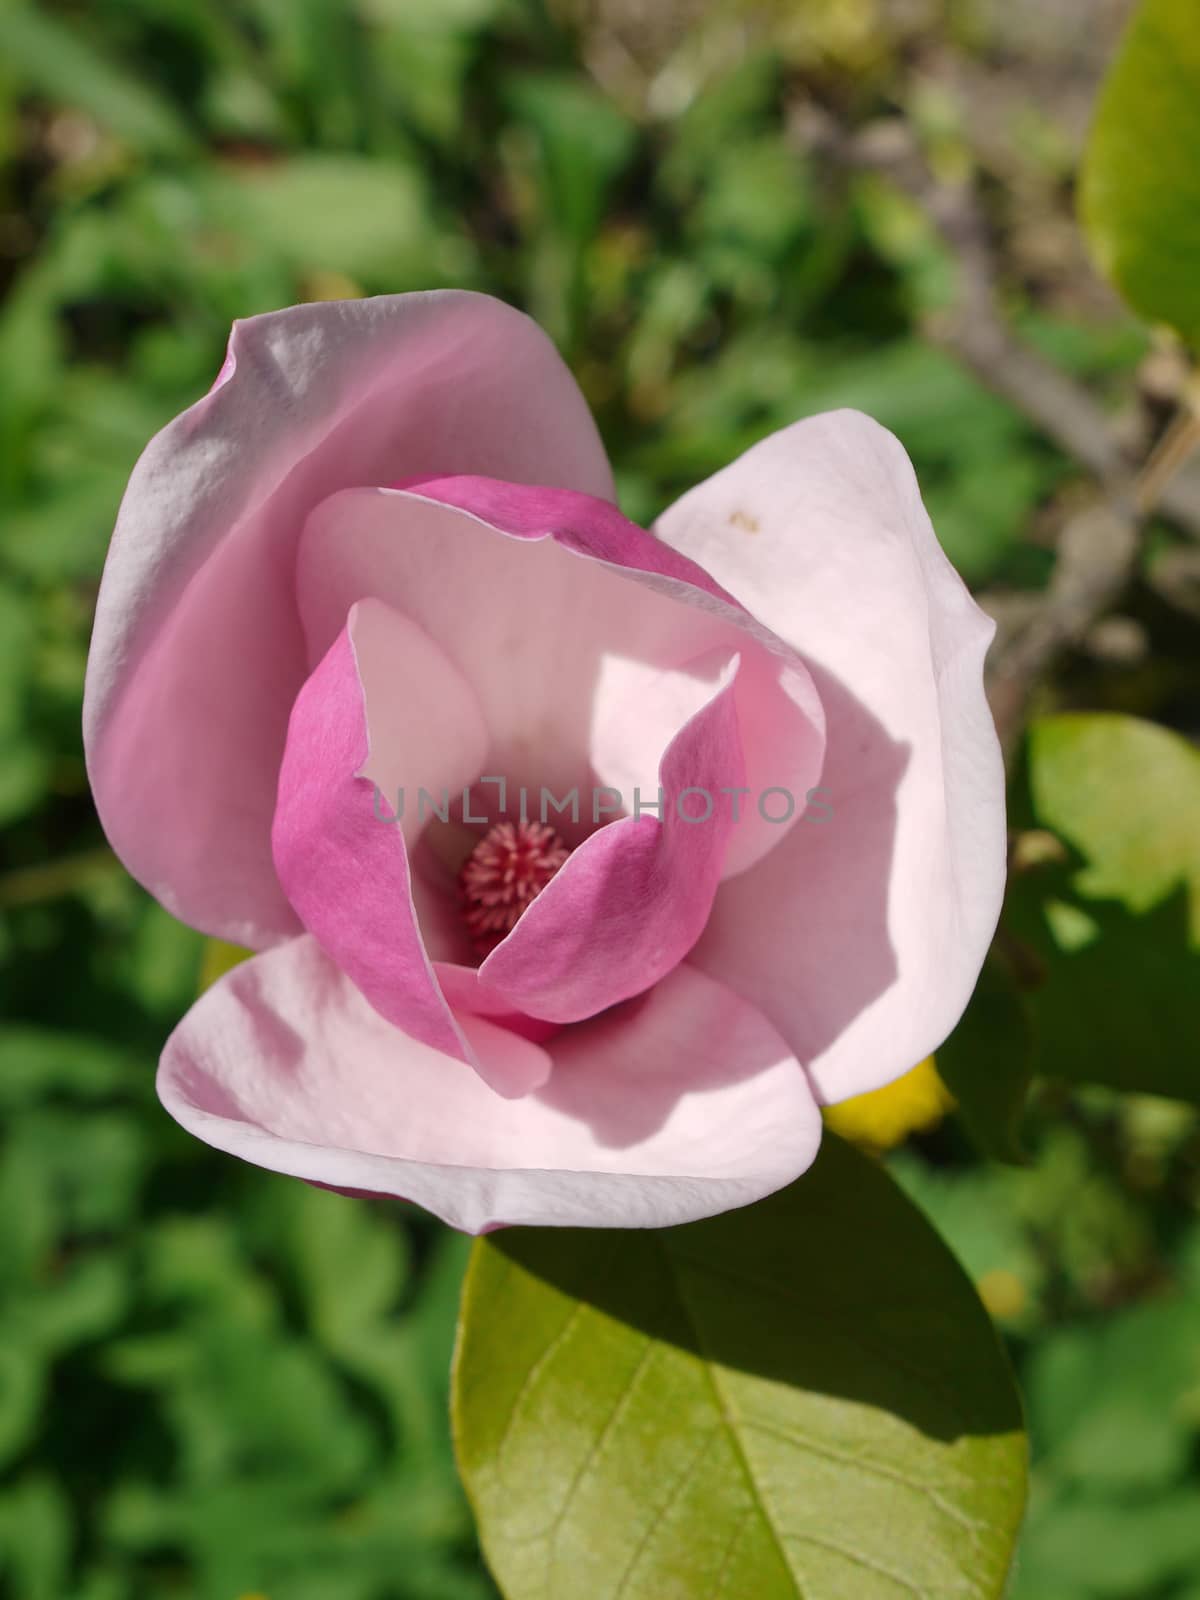 A beautiful big flower with lush huge pink petals and smooth green leaves by Adamchuk